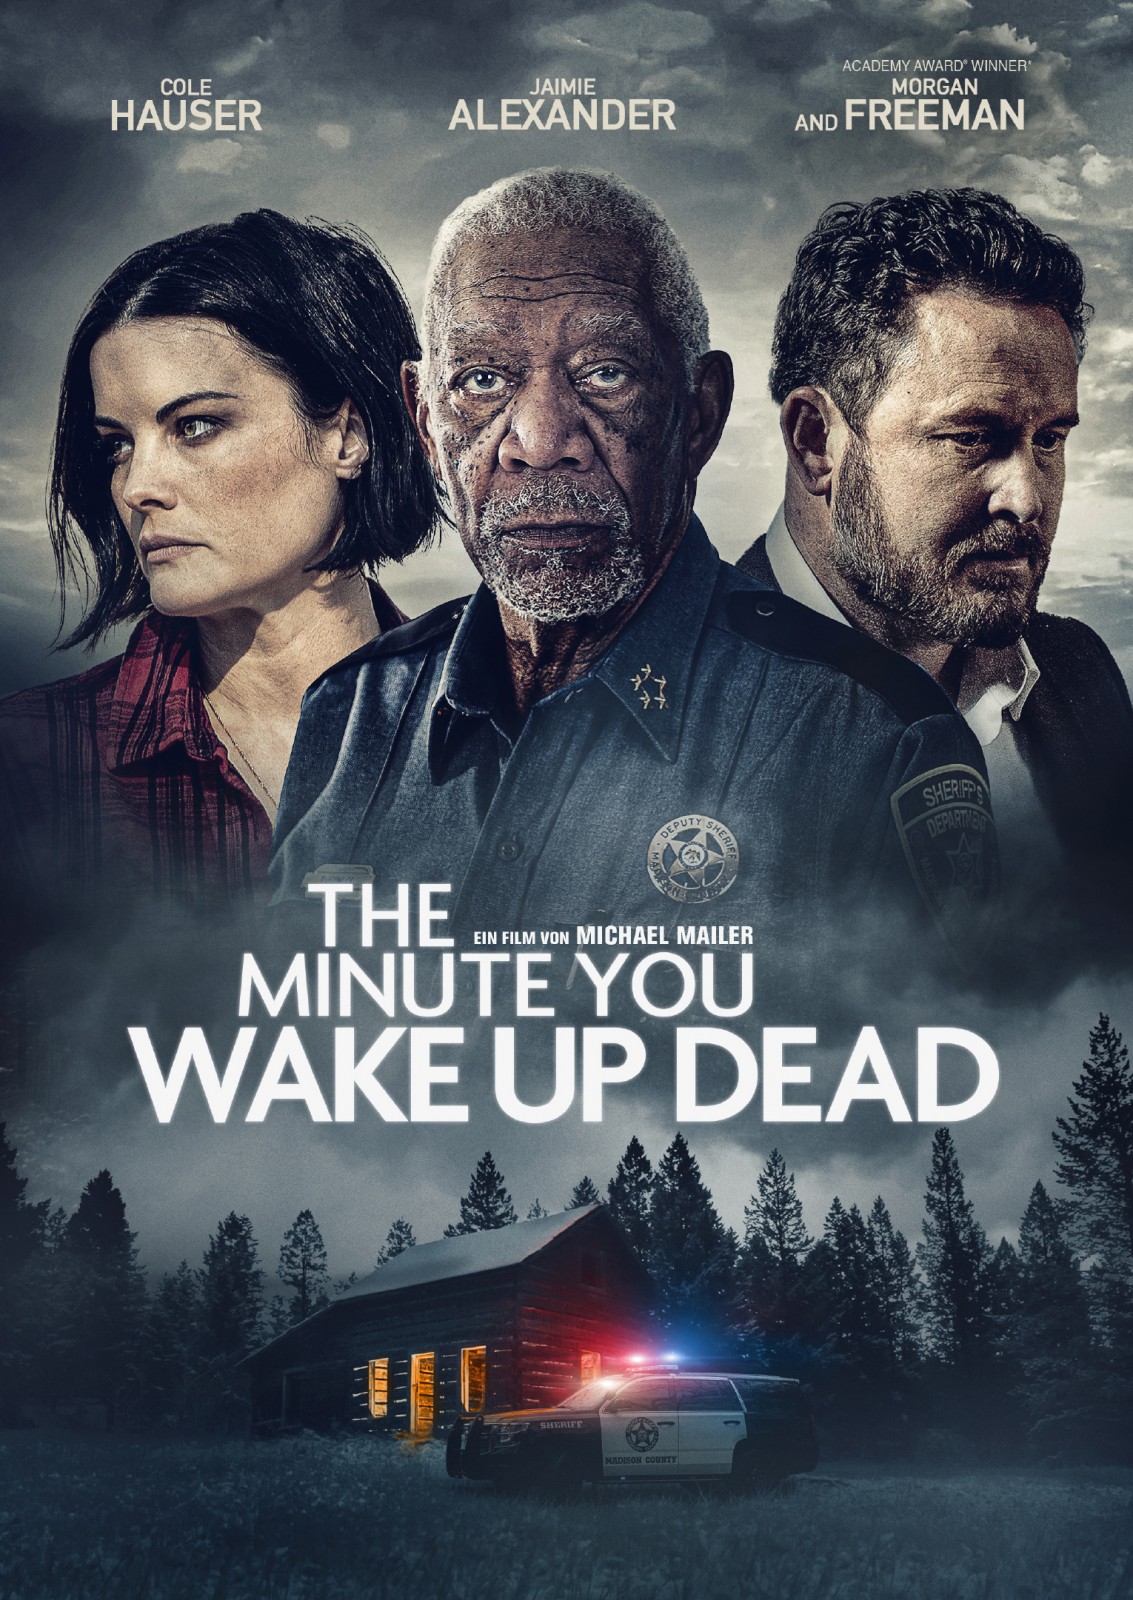 The Minute You Wake Up Dead Trailer & Poster